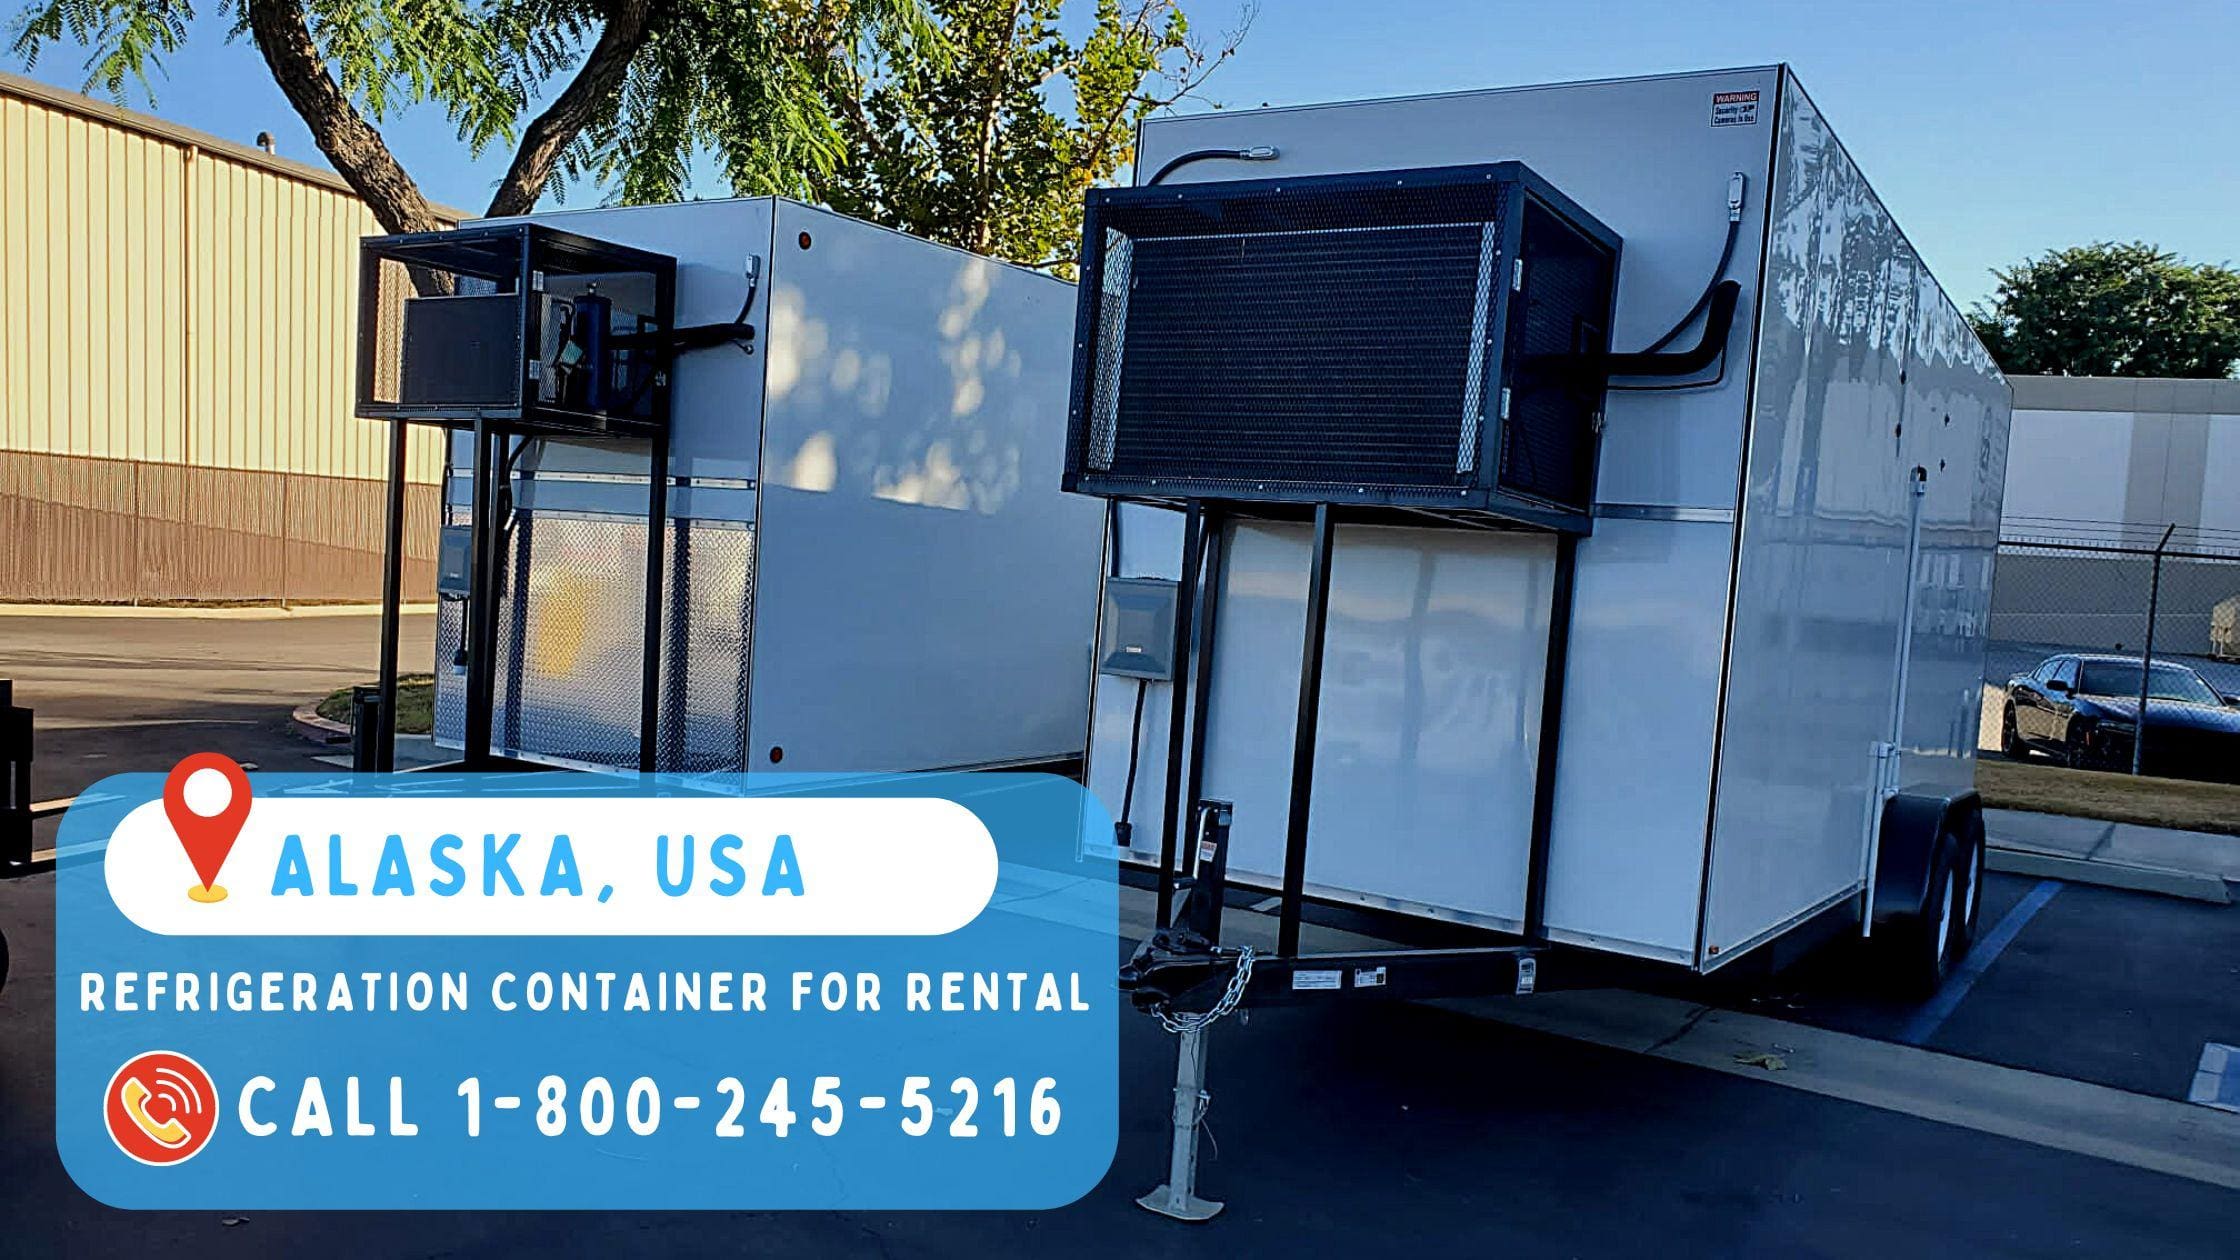 Refrigeration Container for rental in Alaska